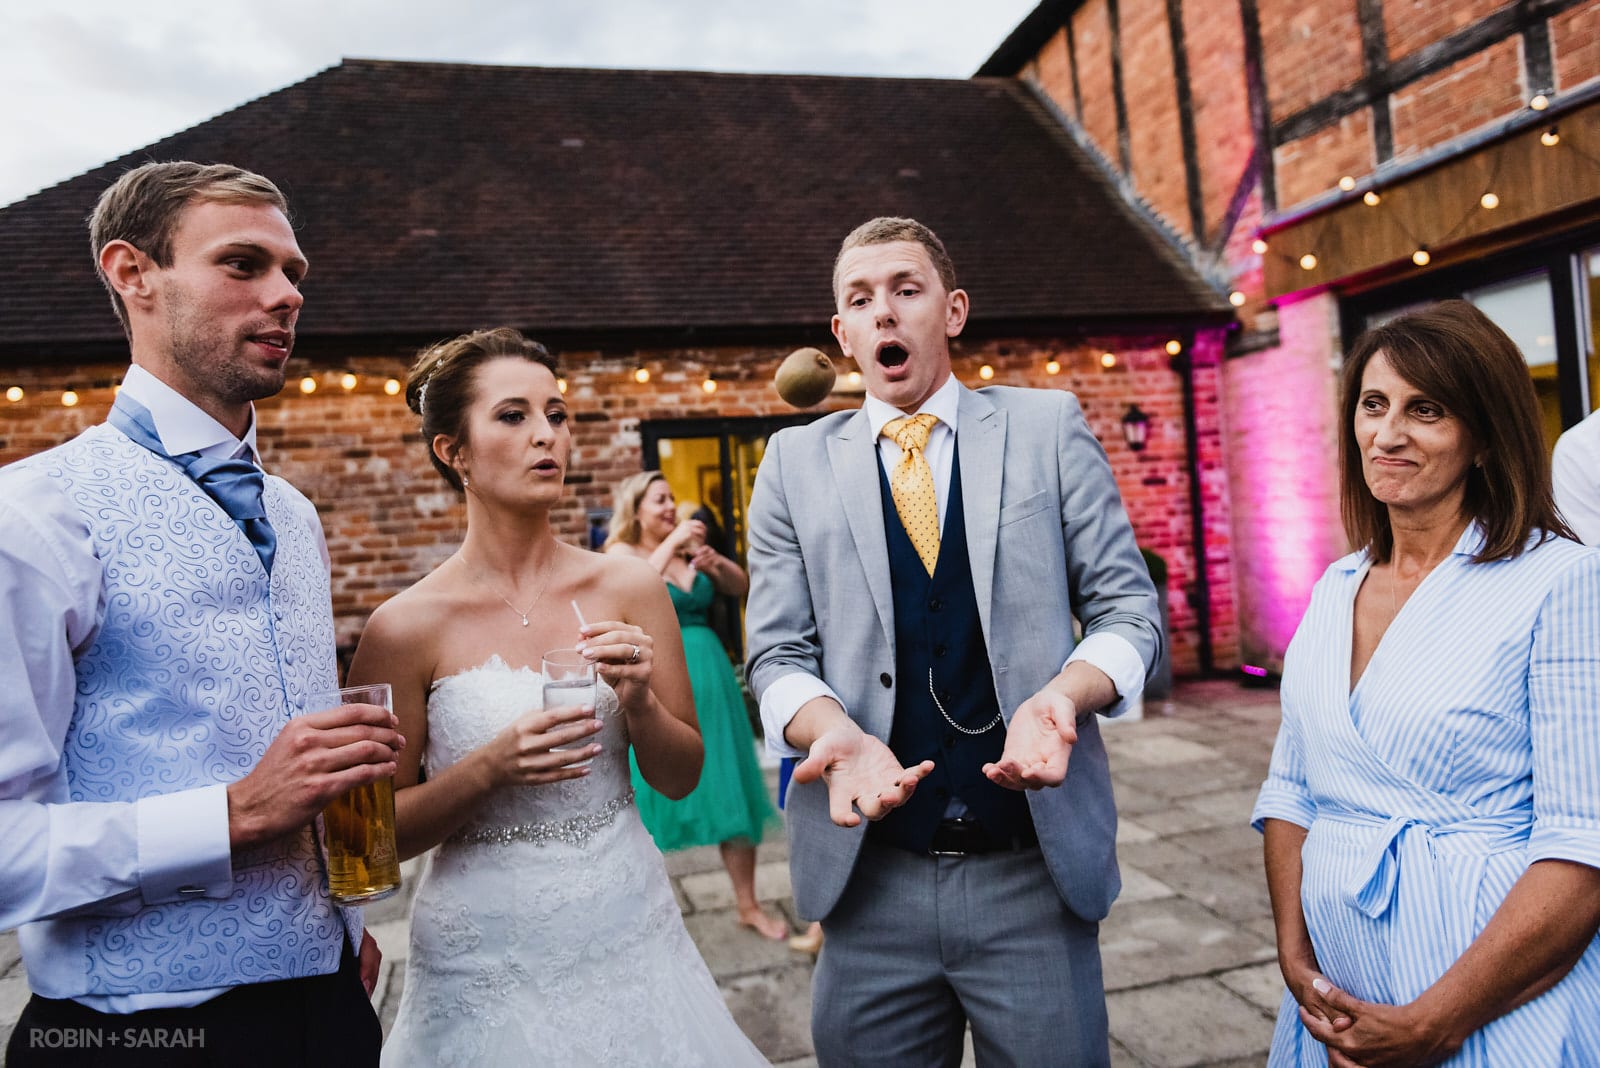 Bride, groom and wedding guests entertained by magician